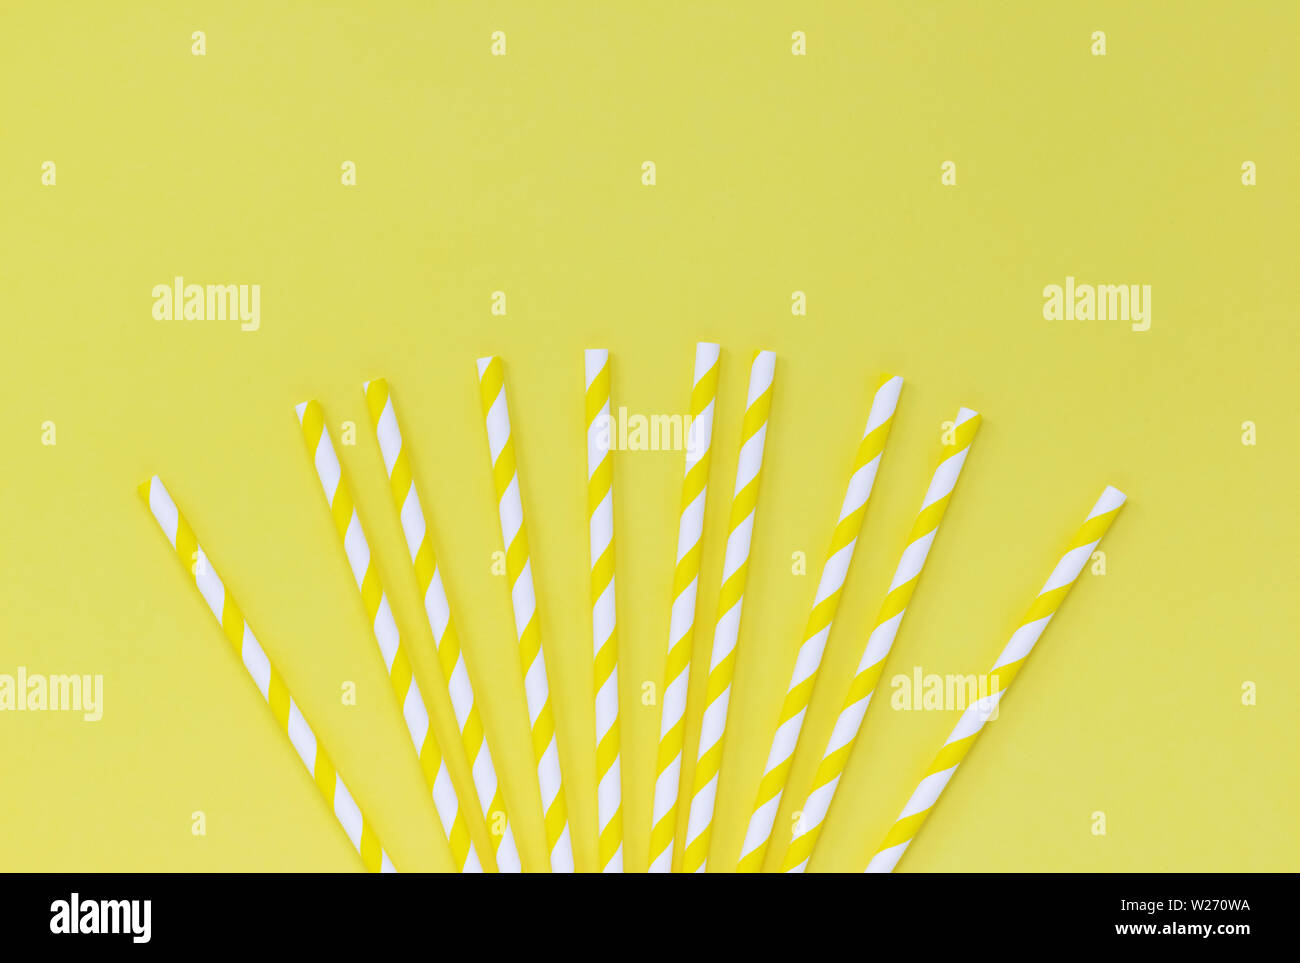 Fan of striped paper straws on a yellow background, with copy space Stock Photo